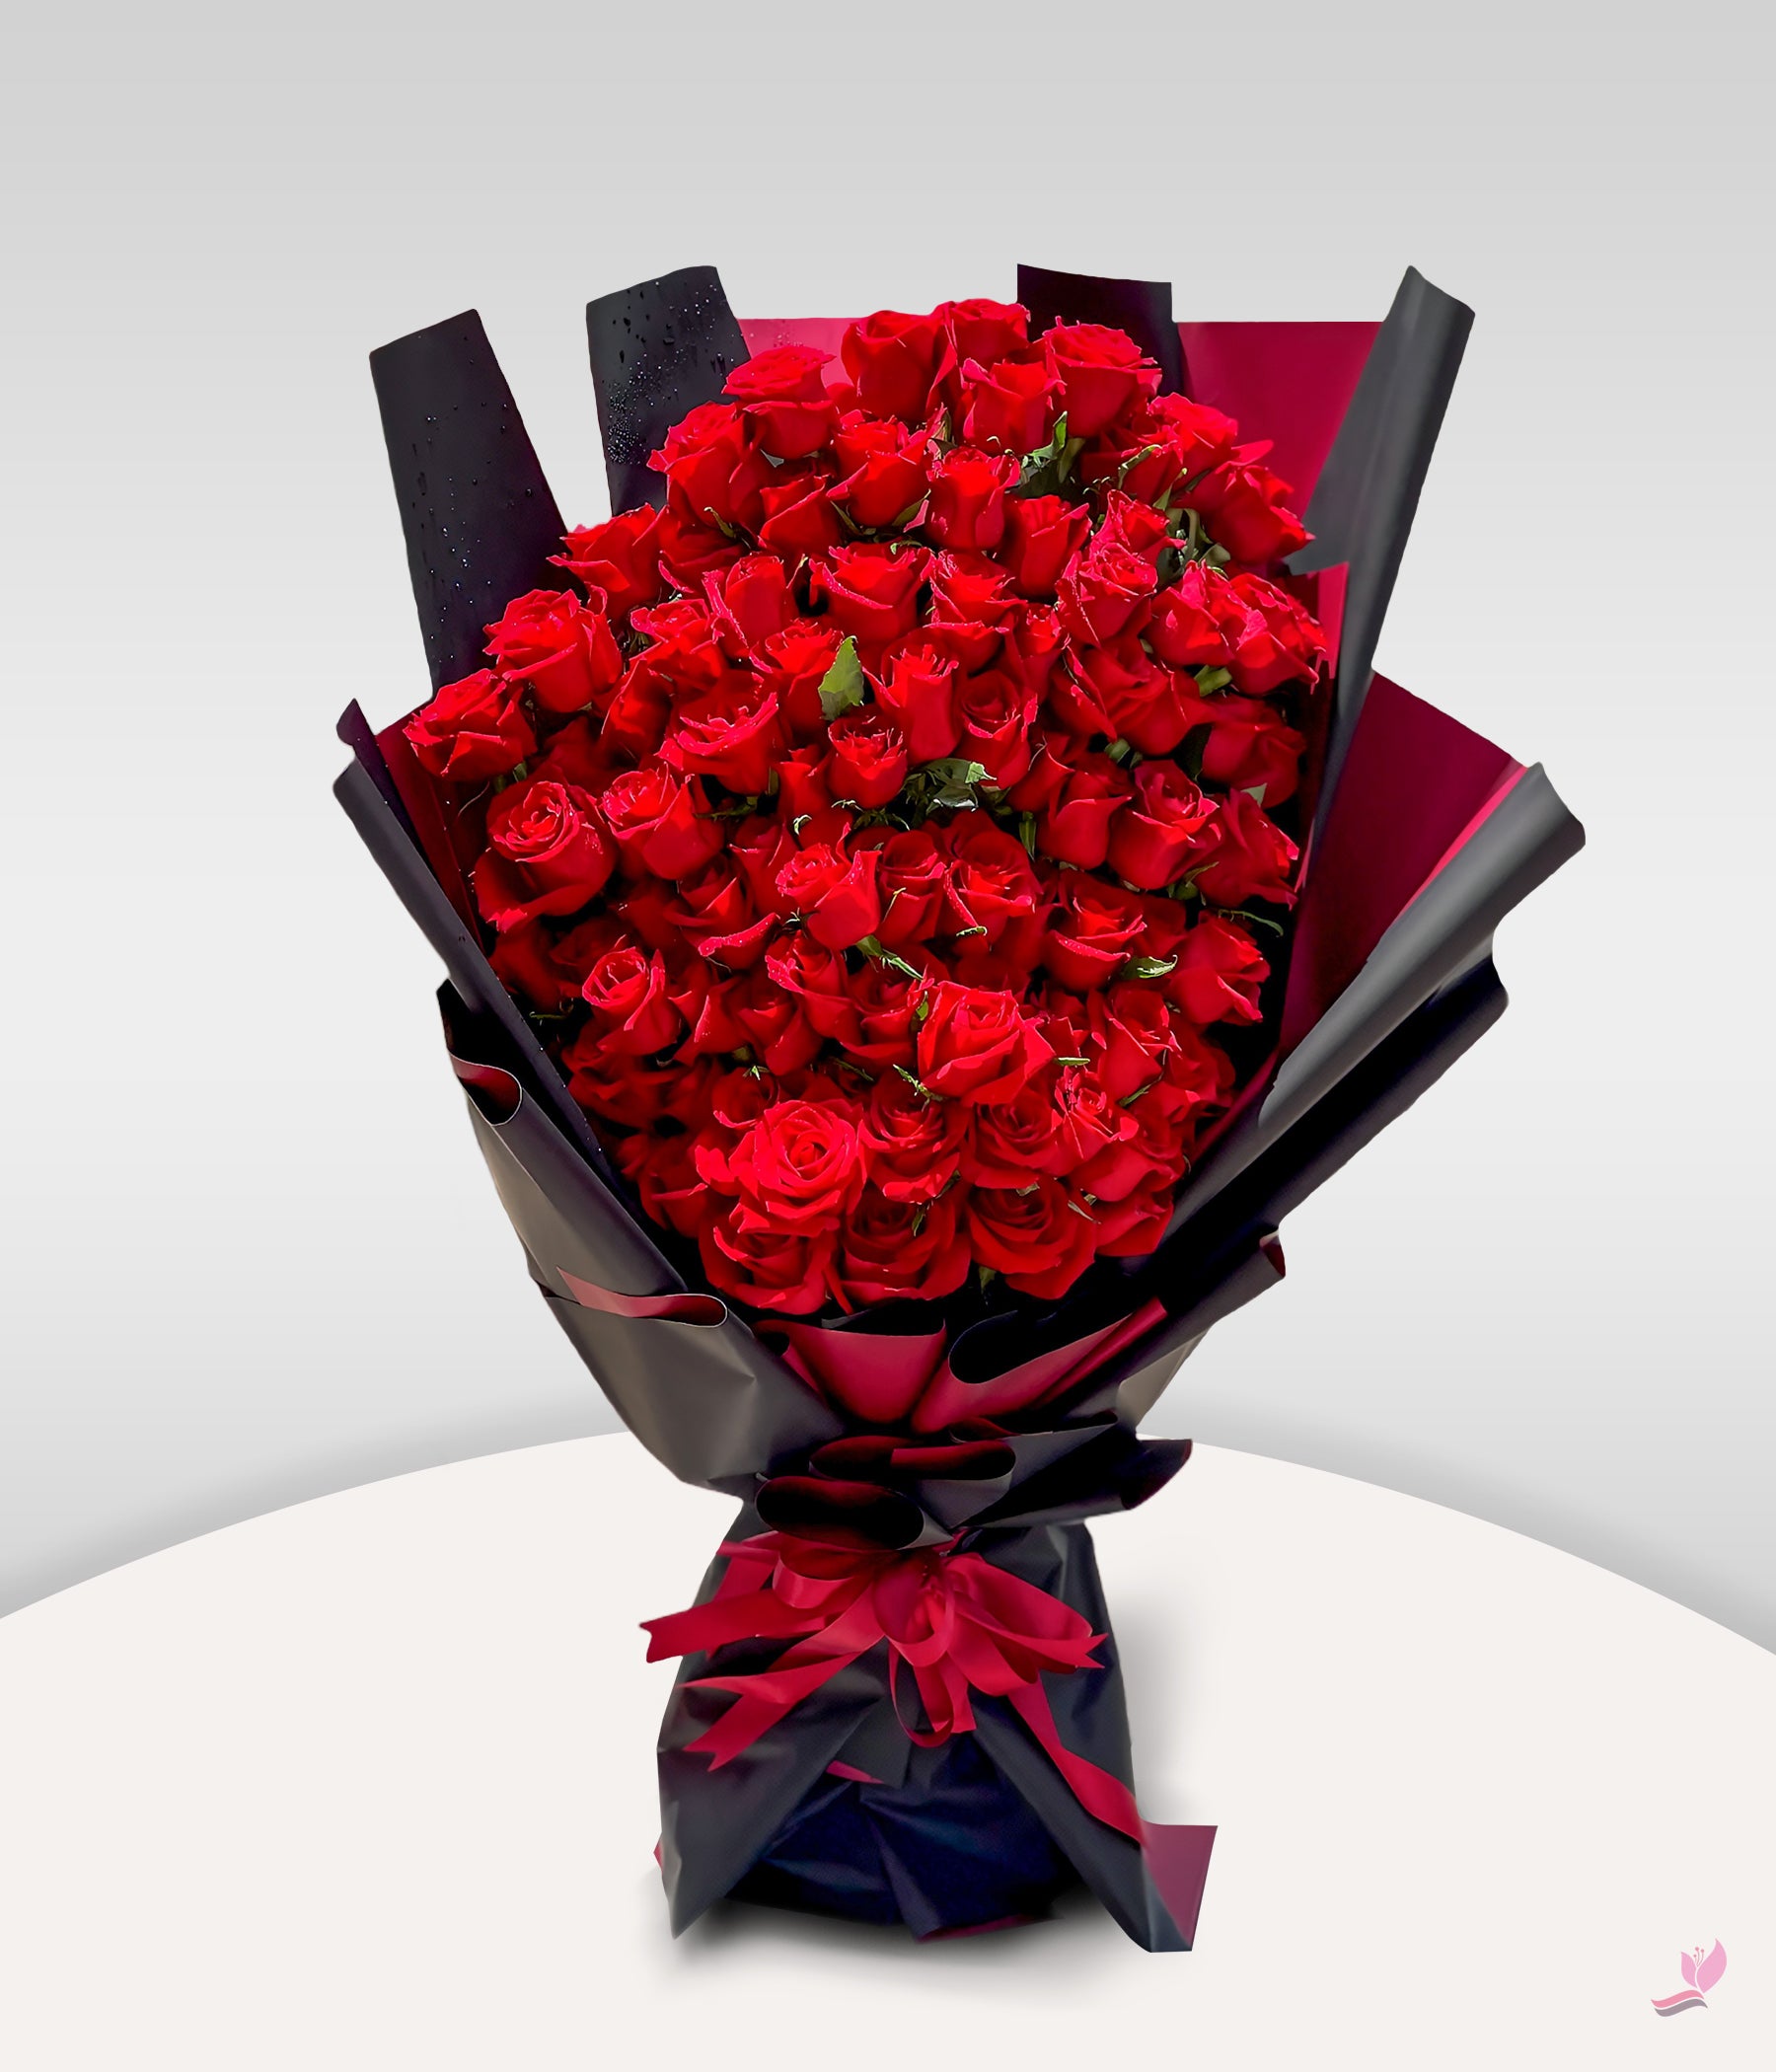 Be My Valentine - Arabianblossom - 100 red roses - Romantic Gift